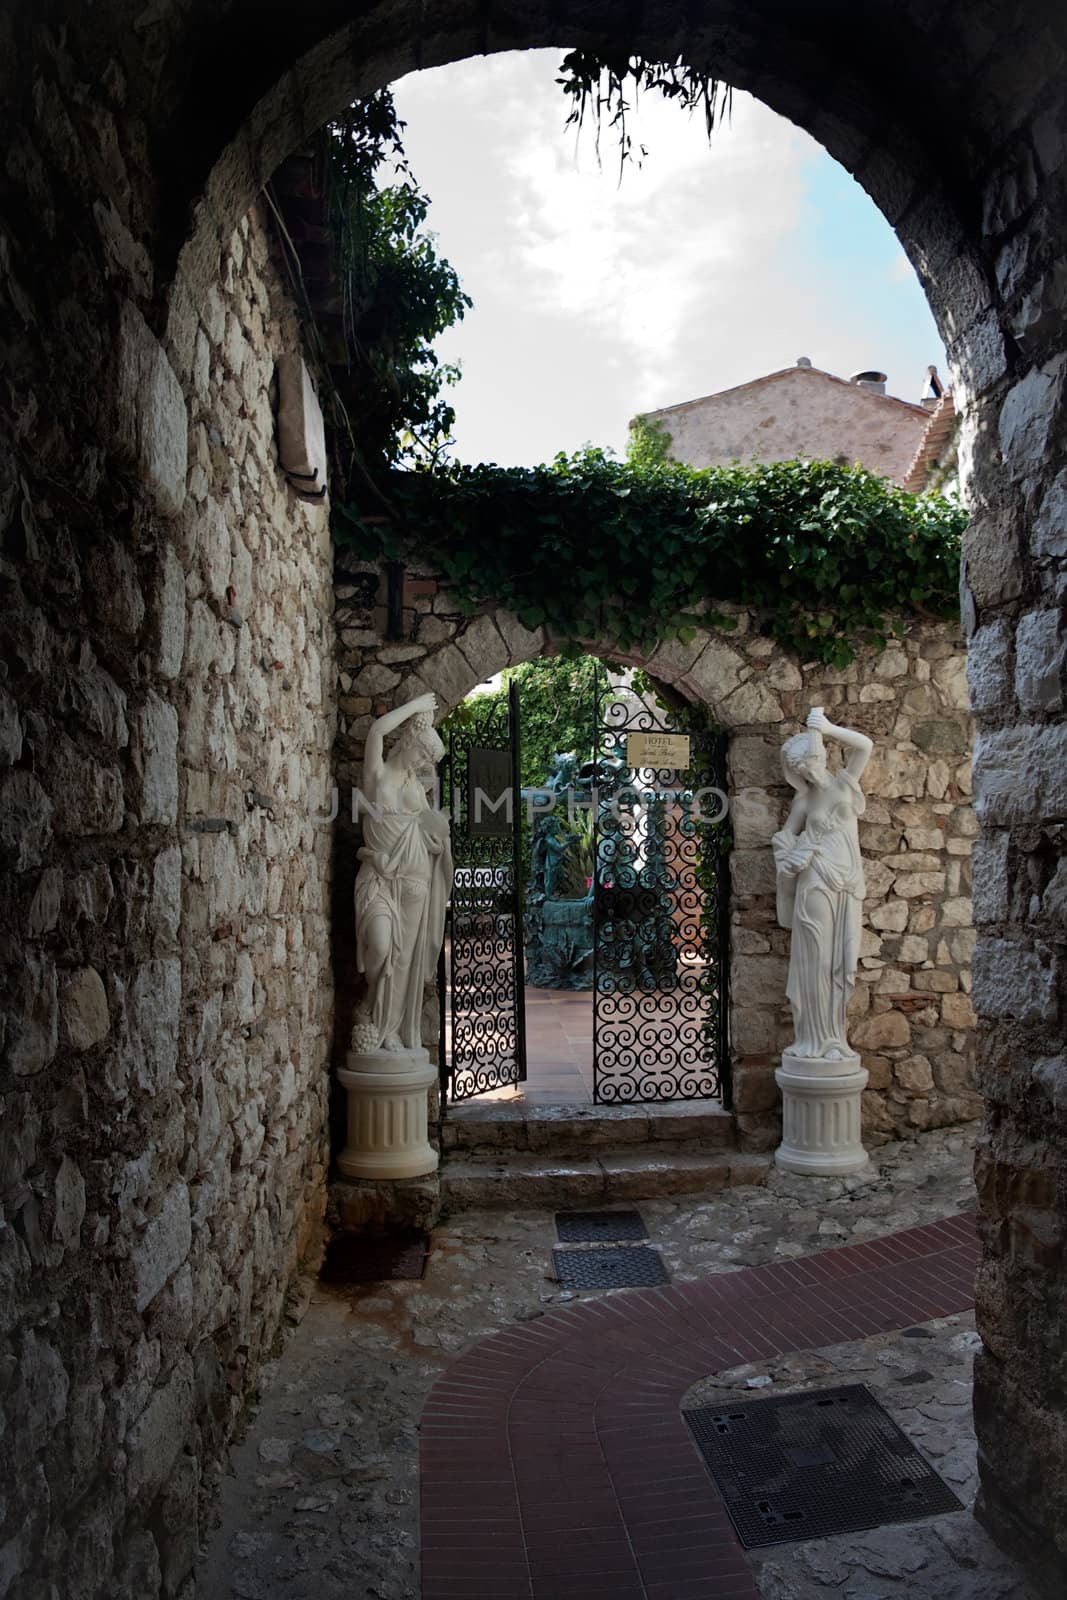 Old courtyard and walls in the village of Eze, France